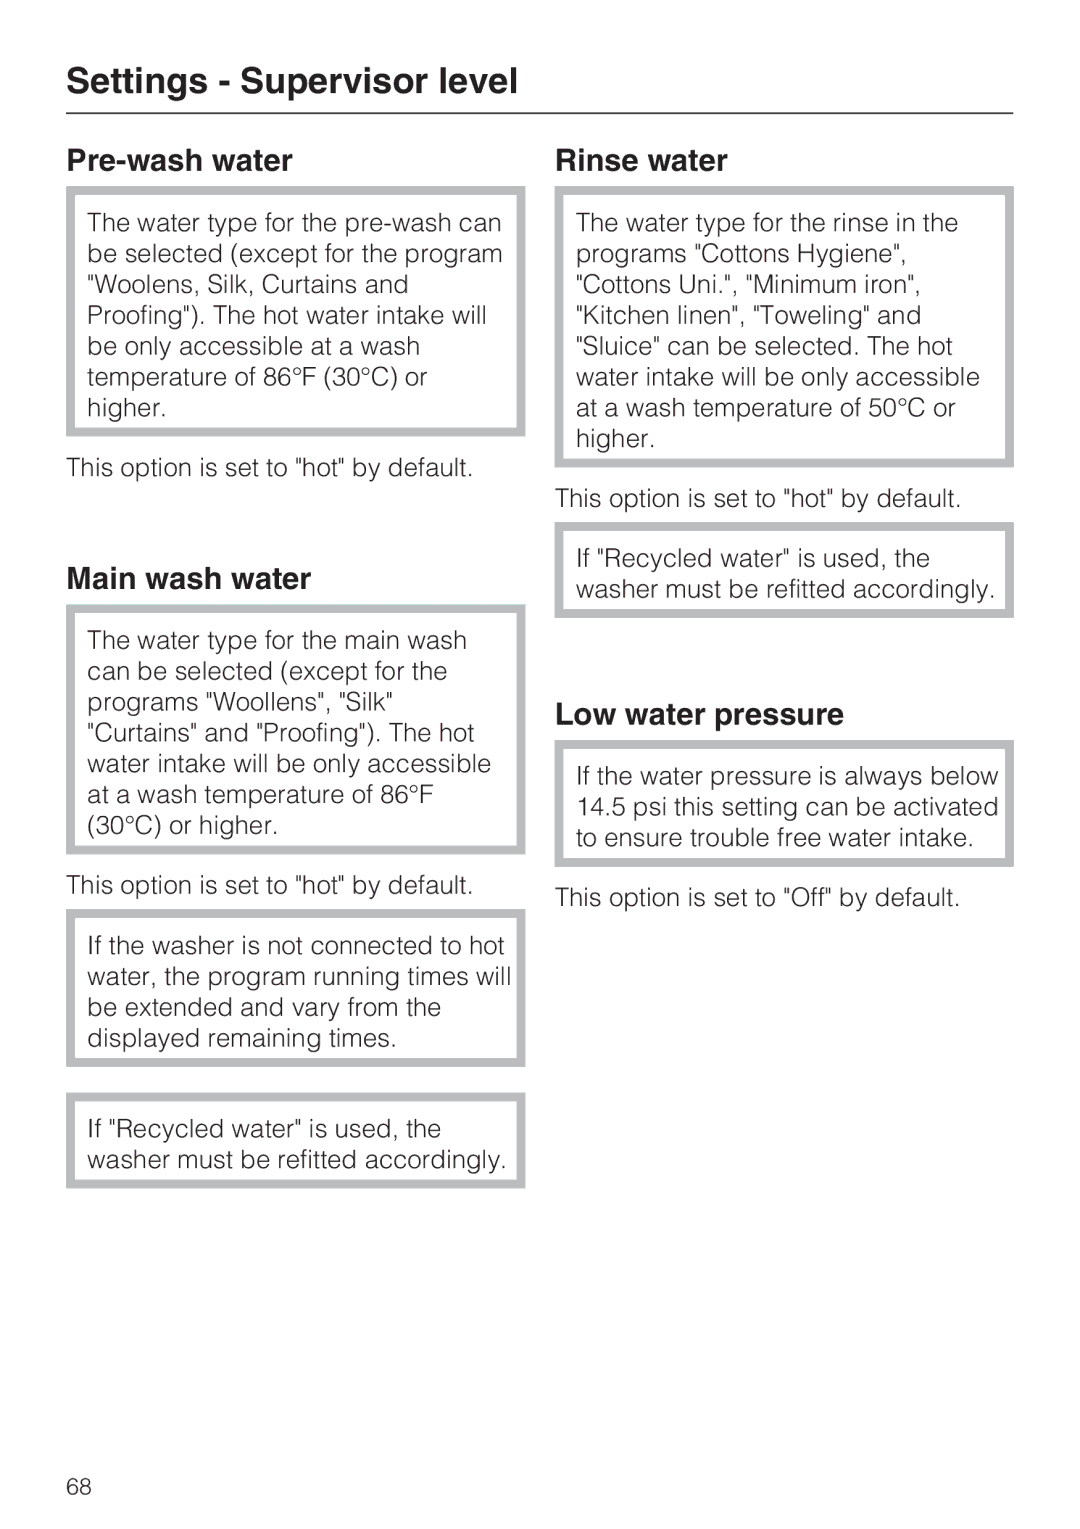 Miele 07 509 320 operating instructions Pre-wash water, Main wash water, Low water pressure 